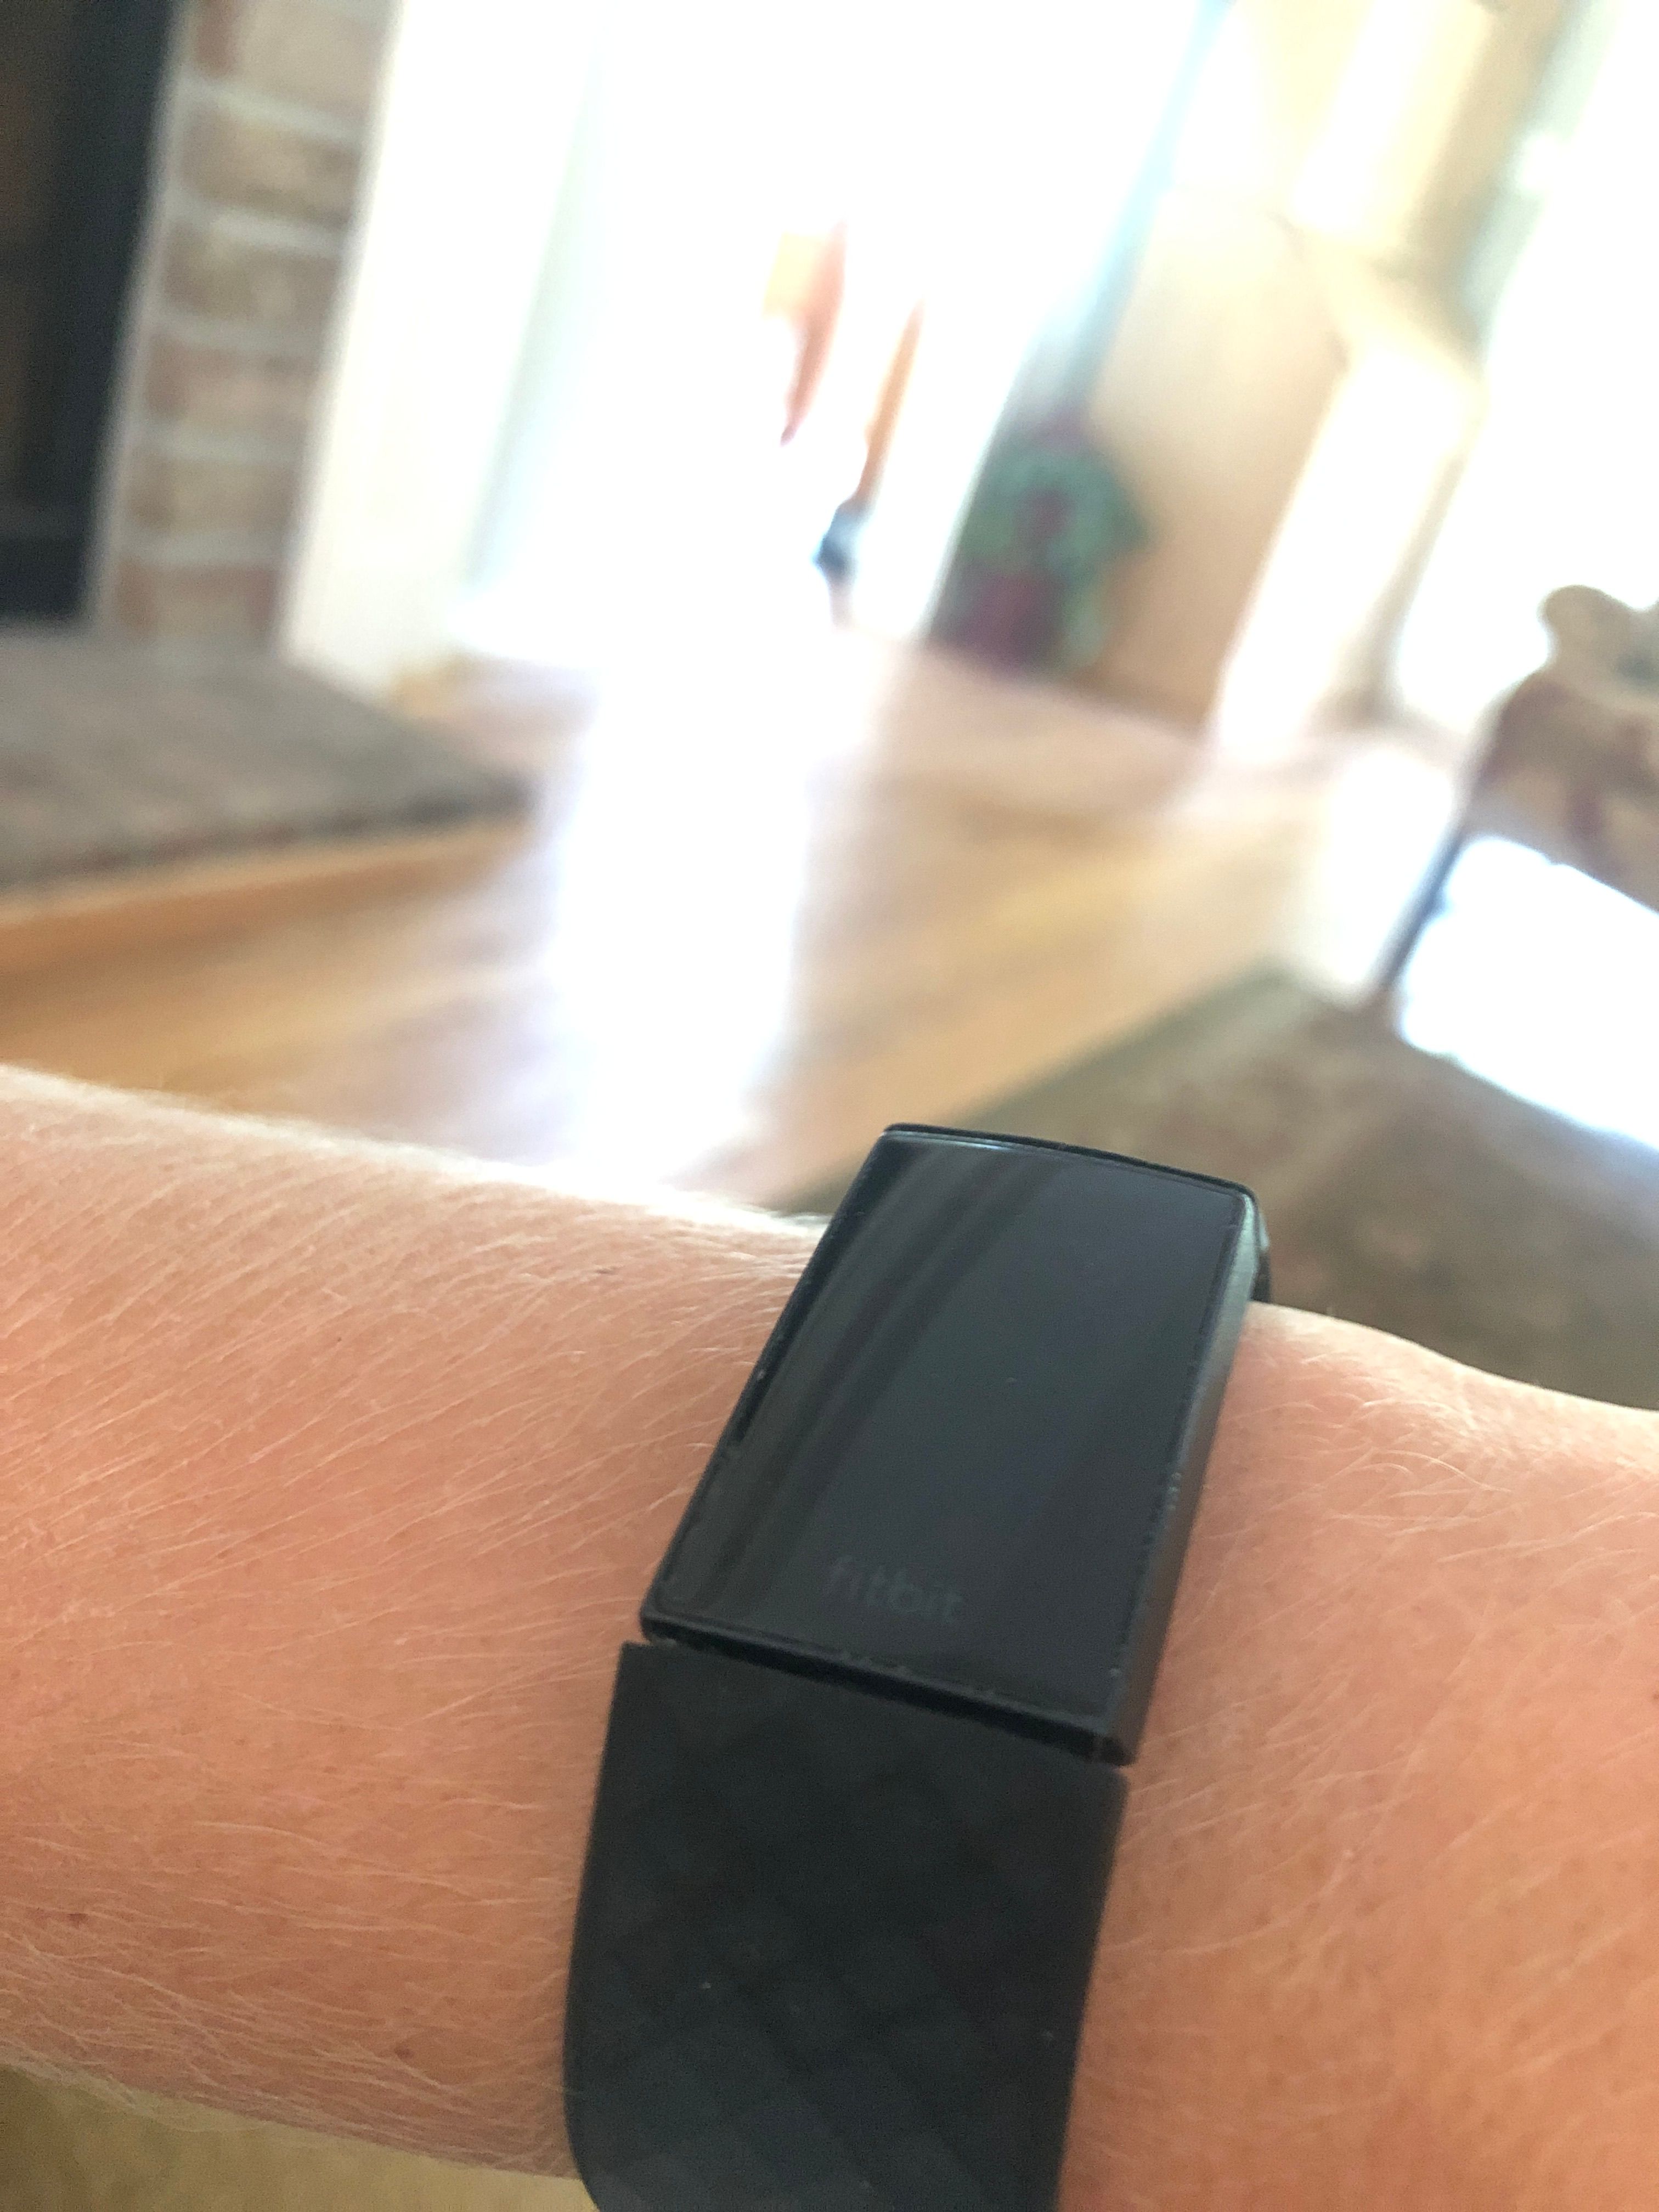 fitbit charge 4 community